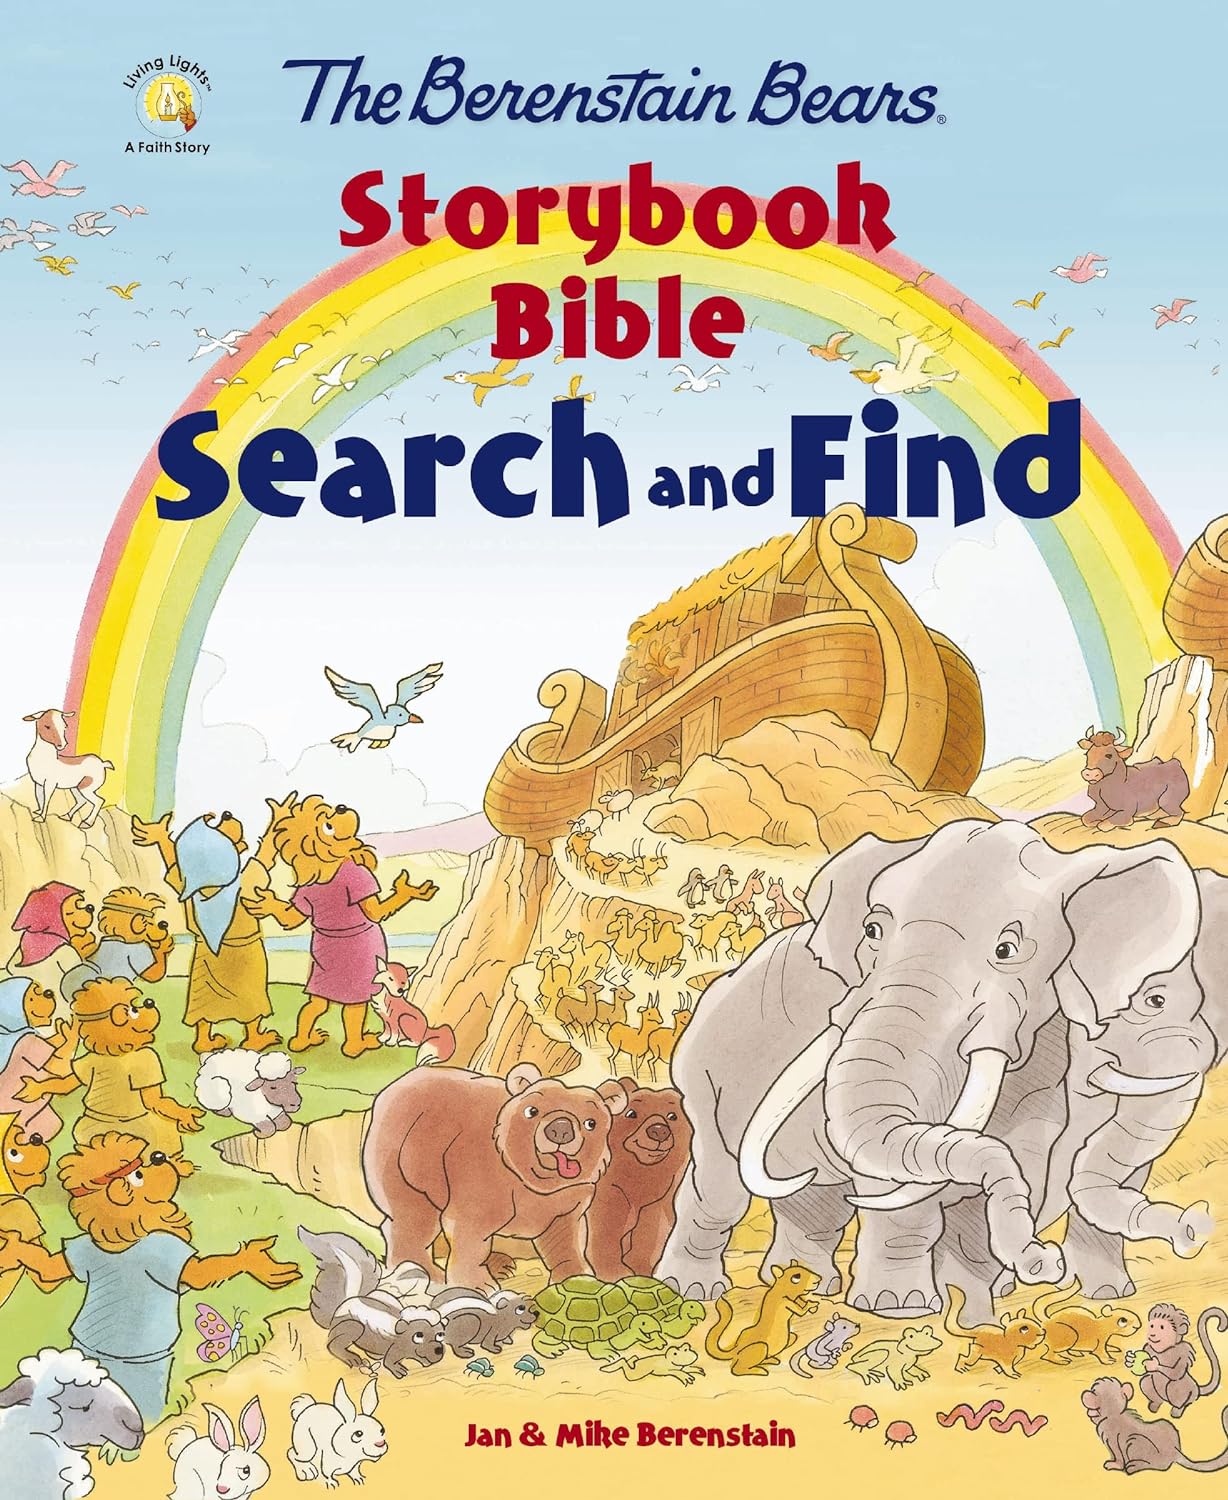 storybook bible search and find | berenstein bears book